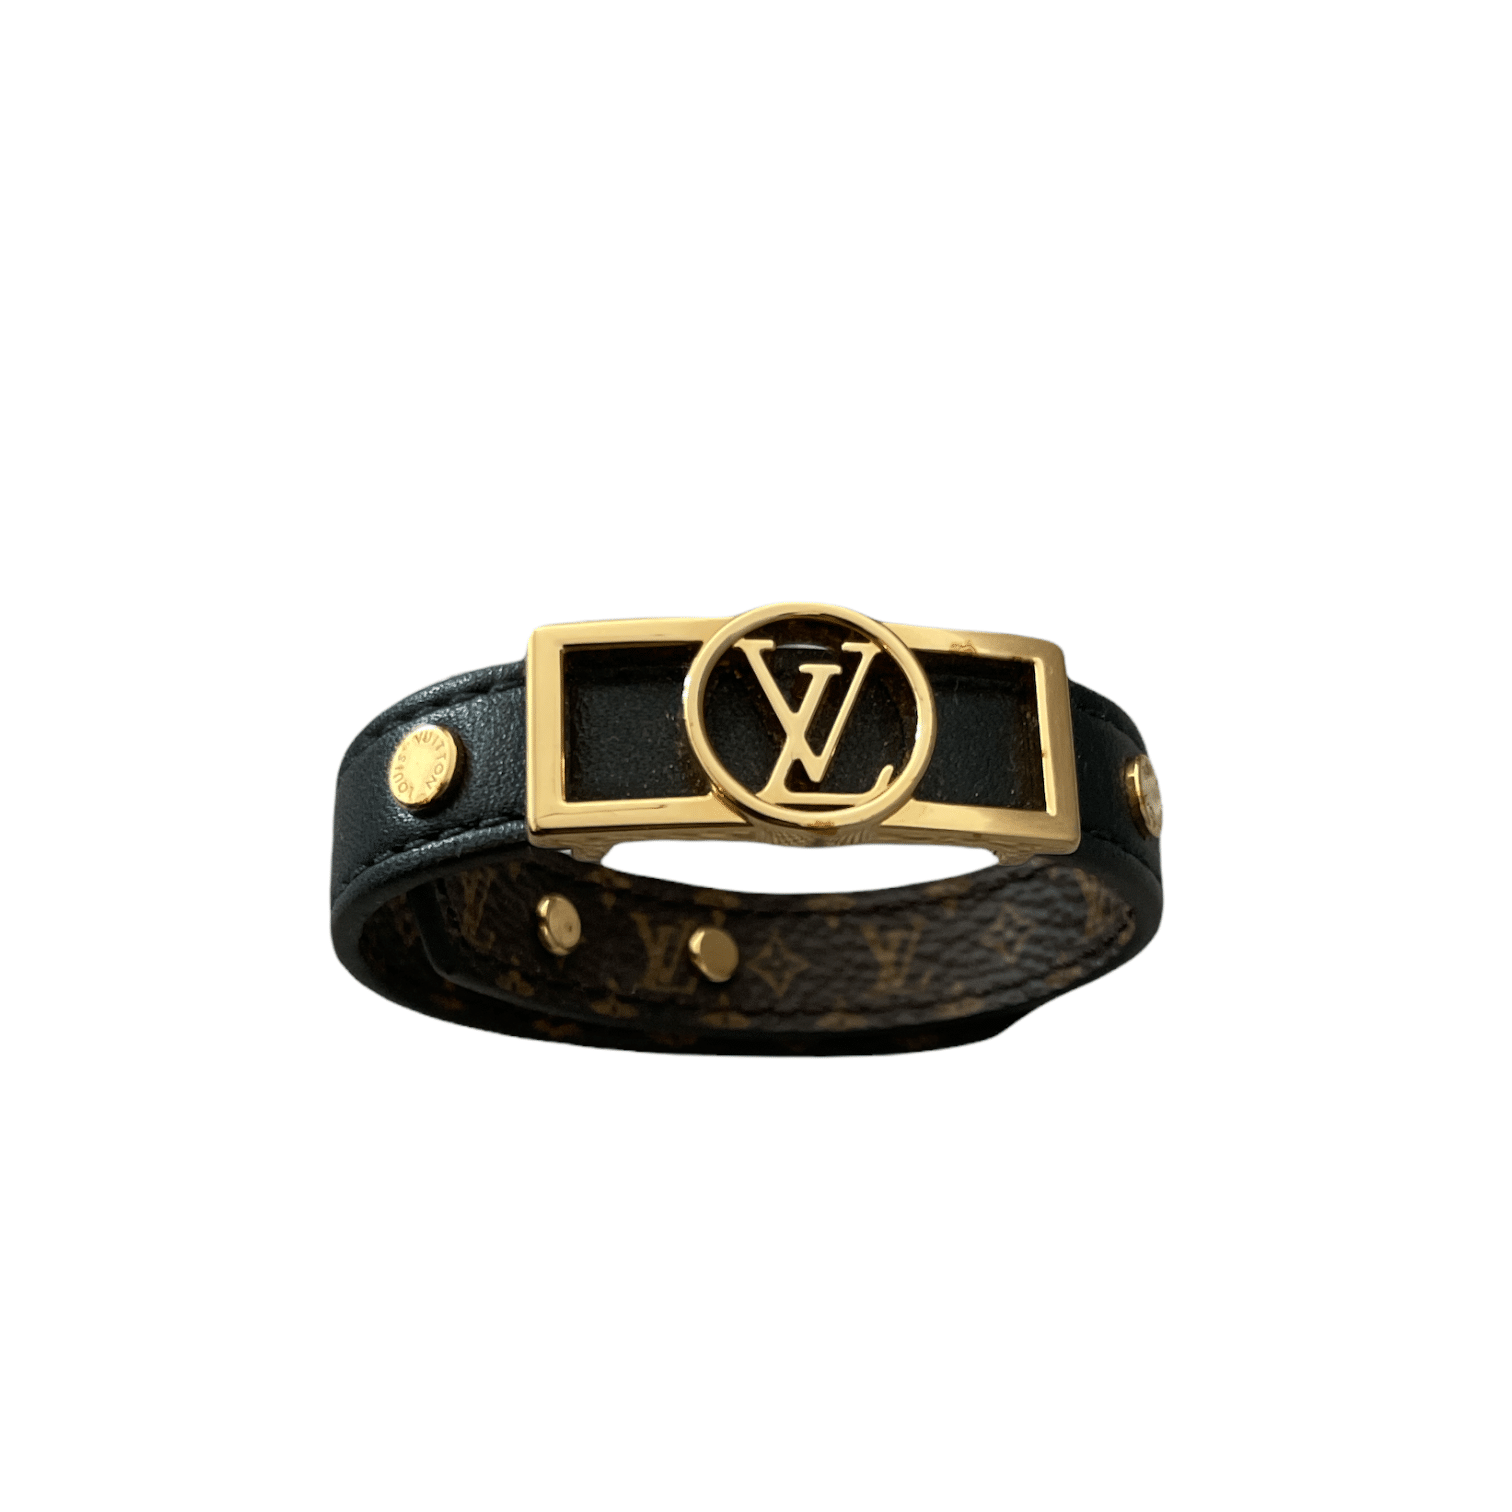 New! Louis Vuitton Party DAUPHINE ARM Bracelet with gold Hardware 💕